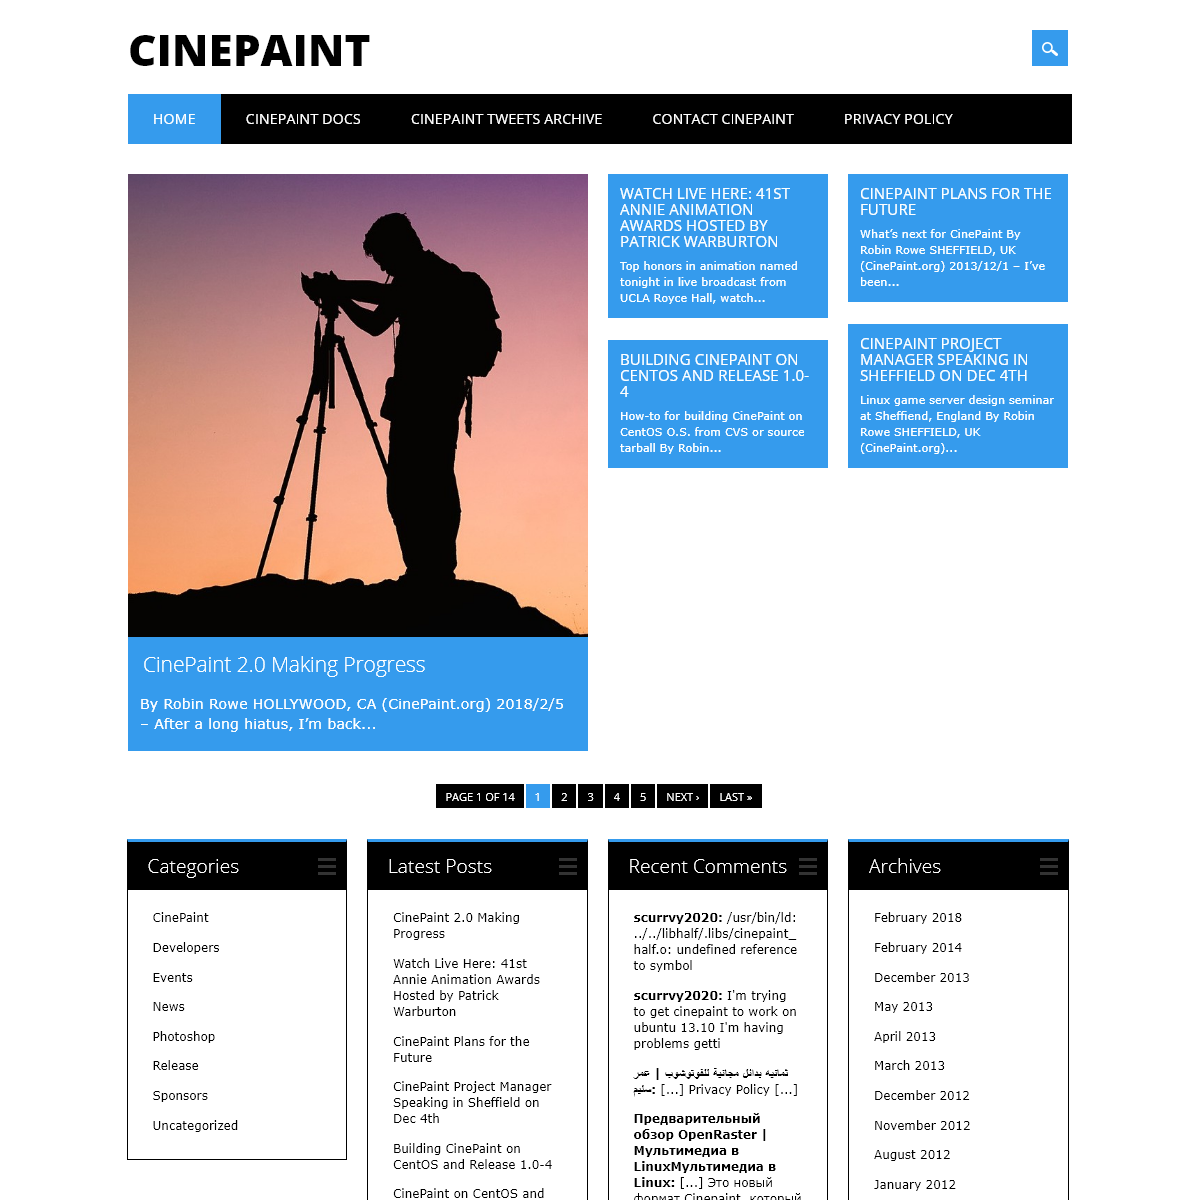 A complete backup of cinepaint.org